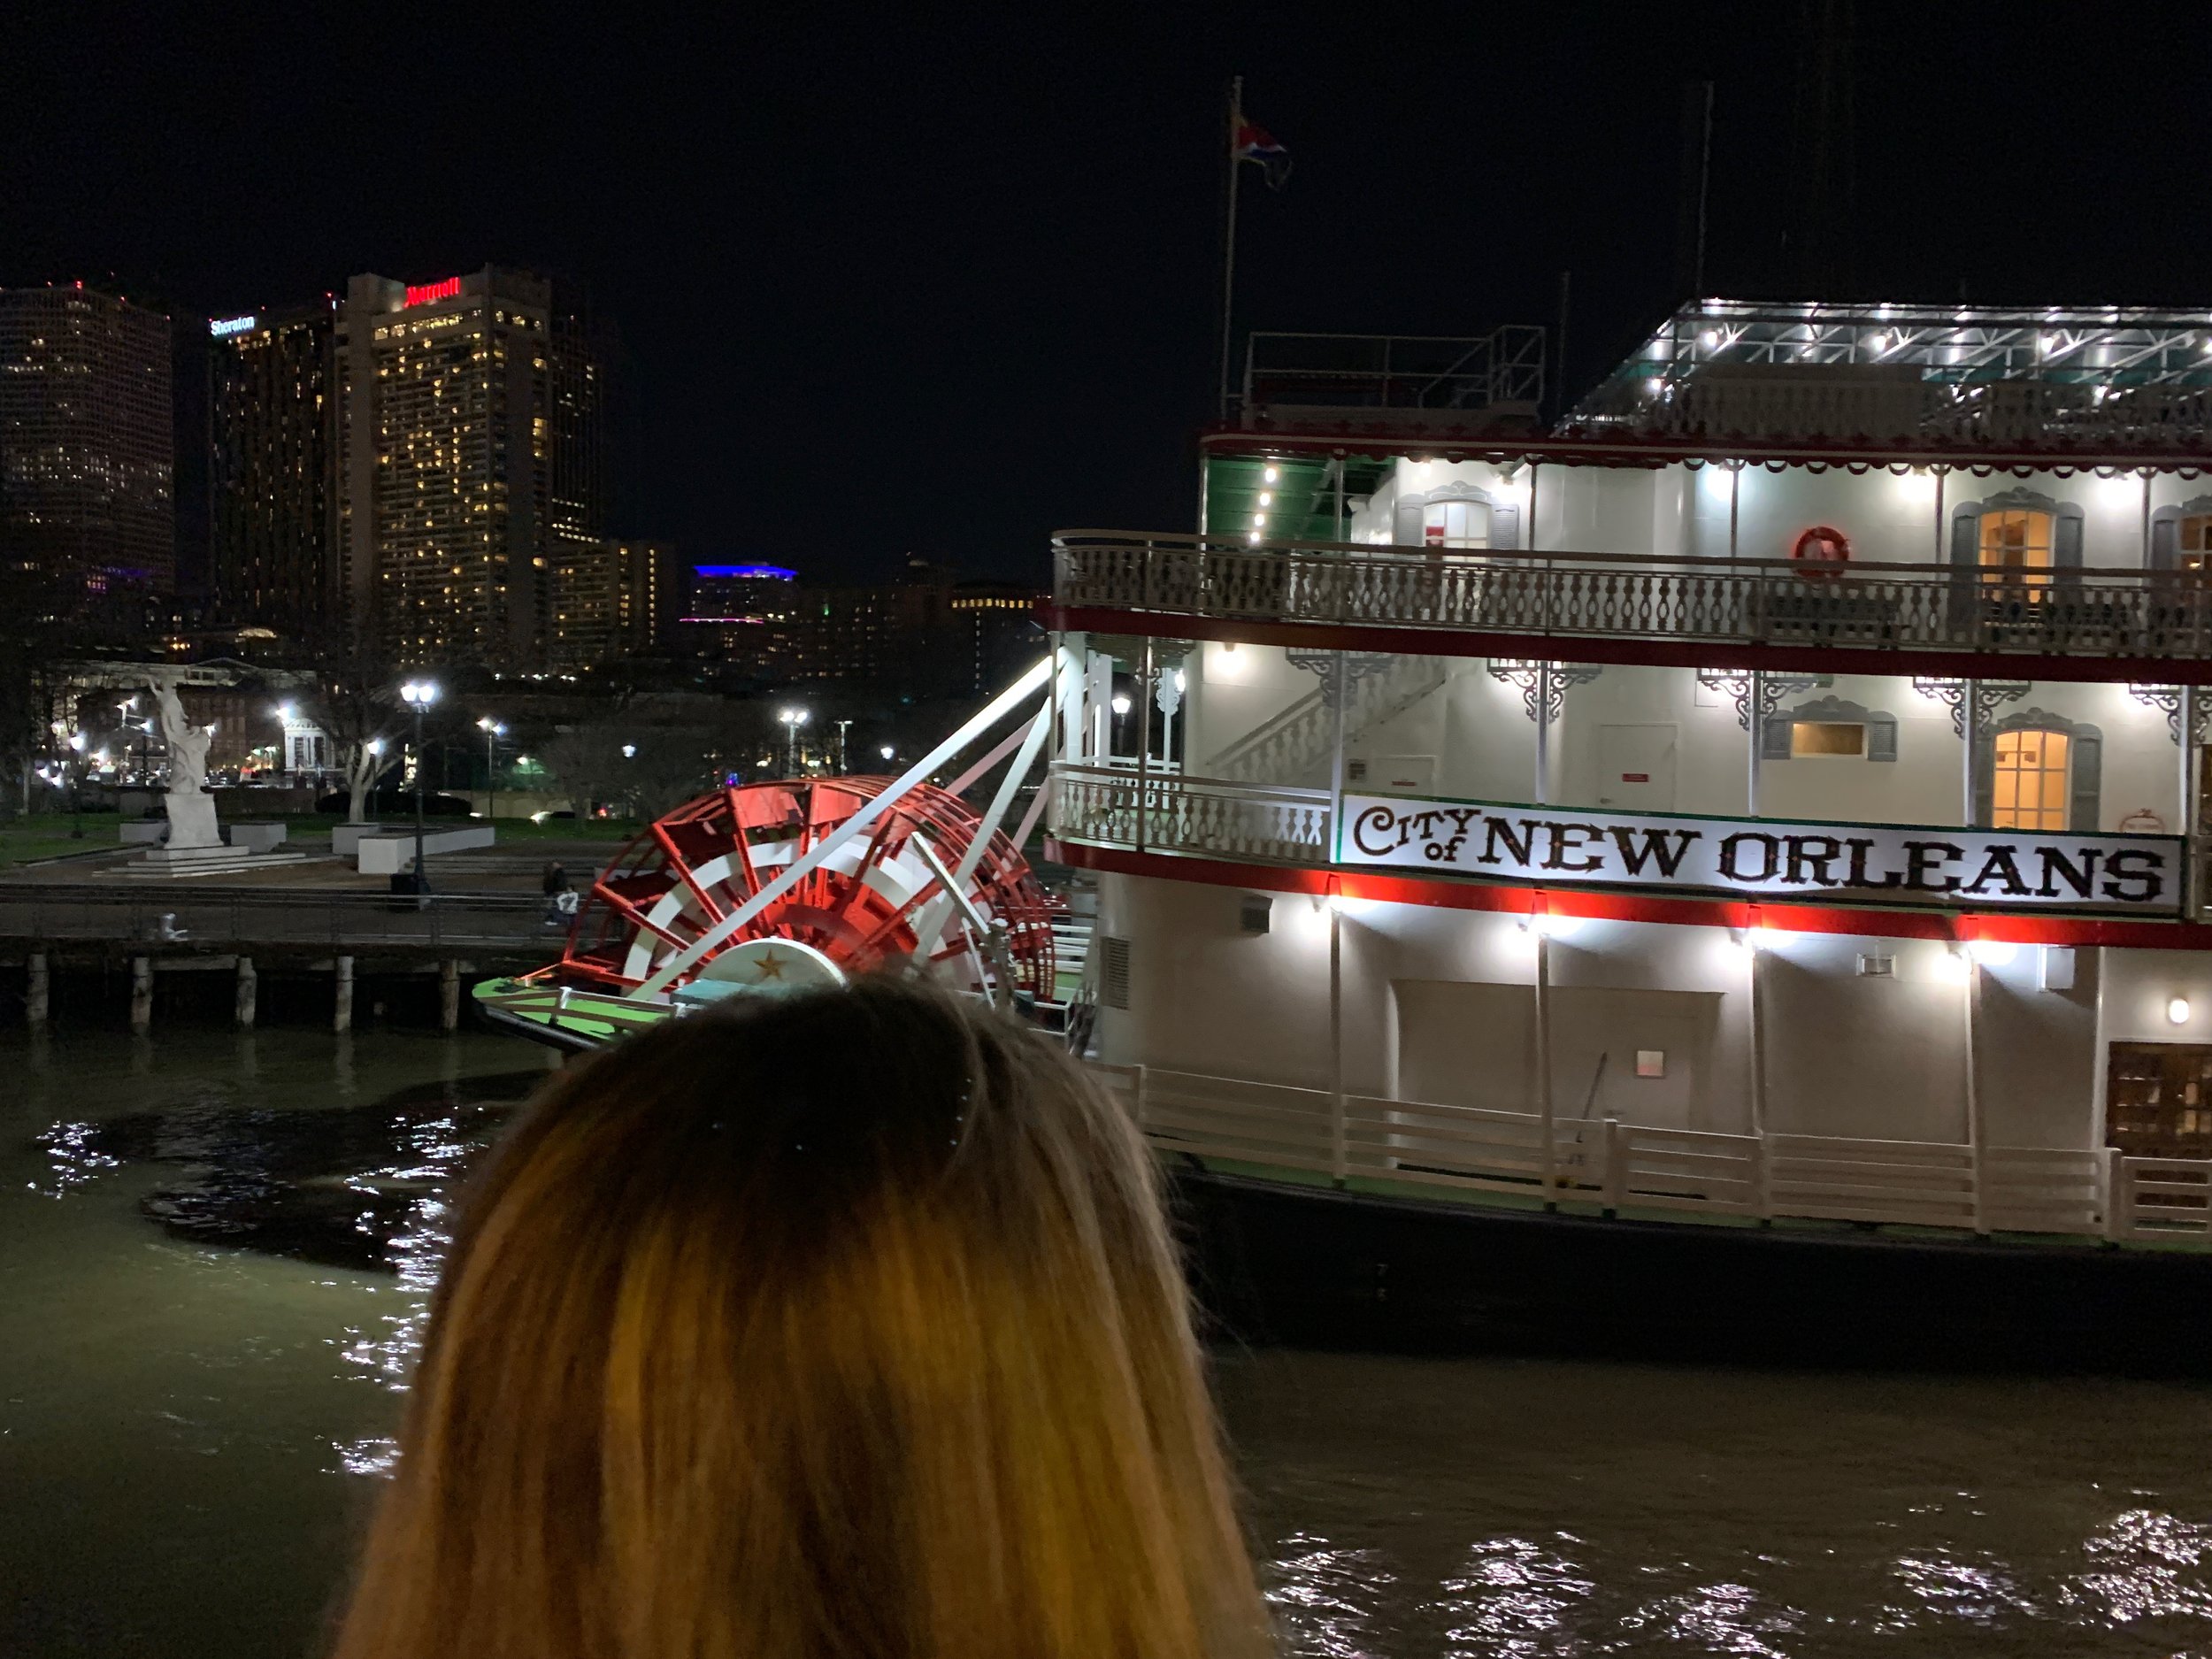 Riverboat Dinner Cruise